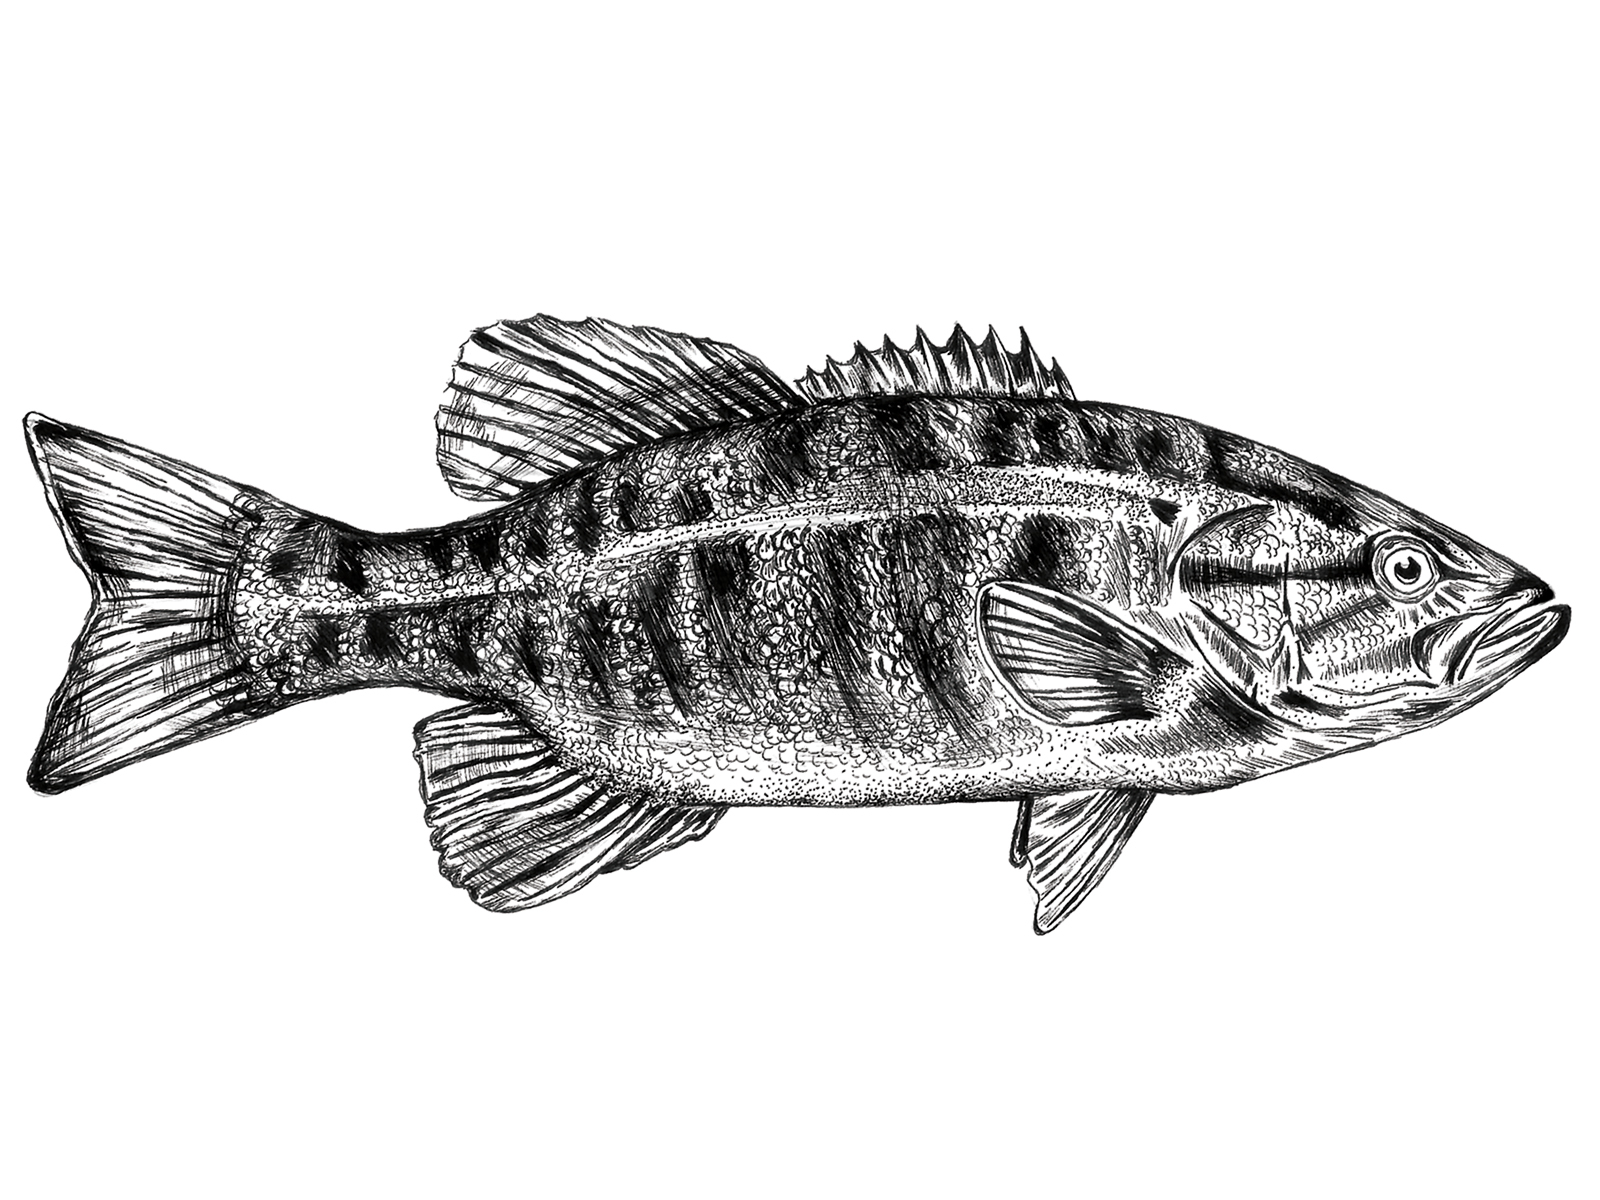 Pen and ink smallmouth bass drawing by Jen Borror